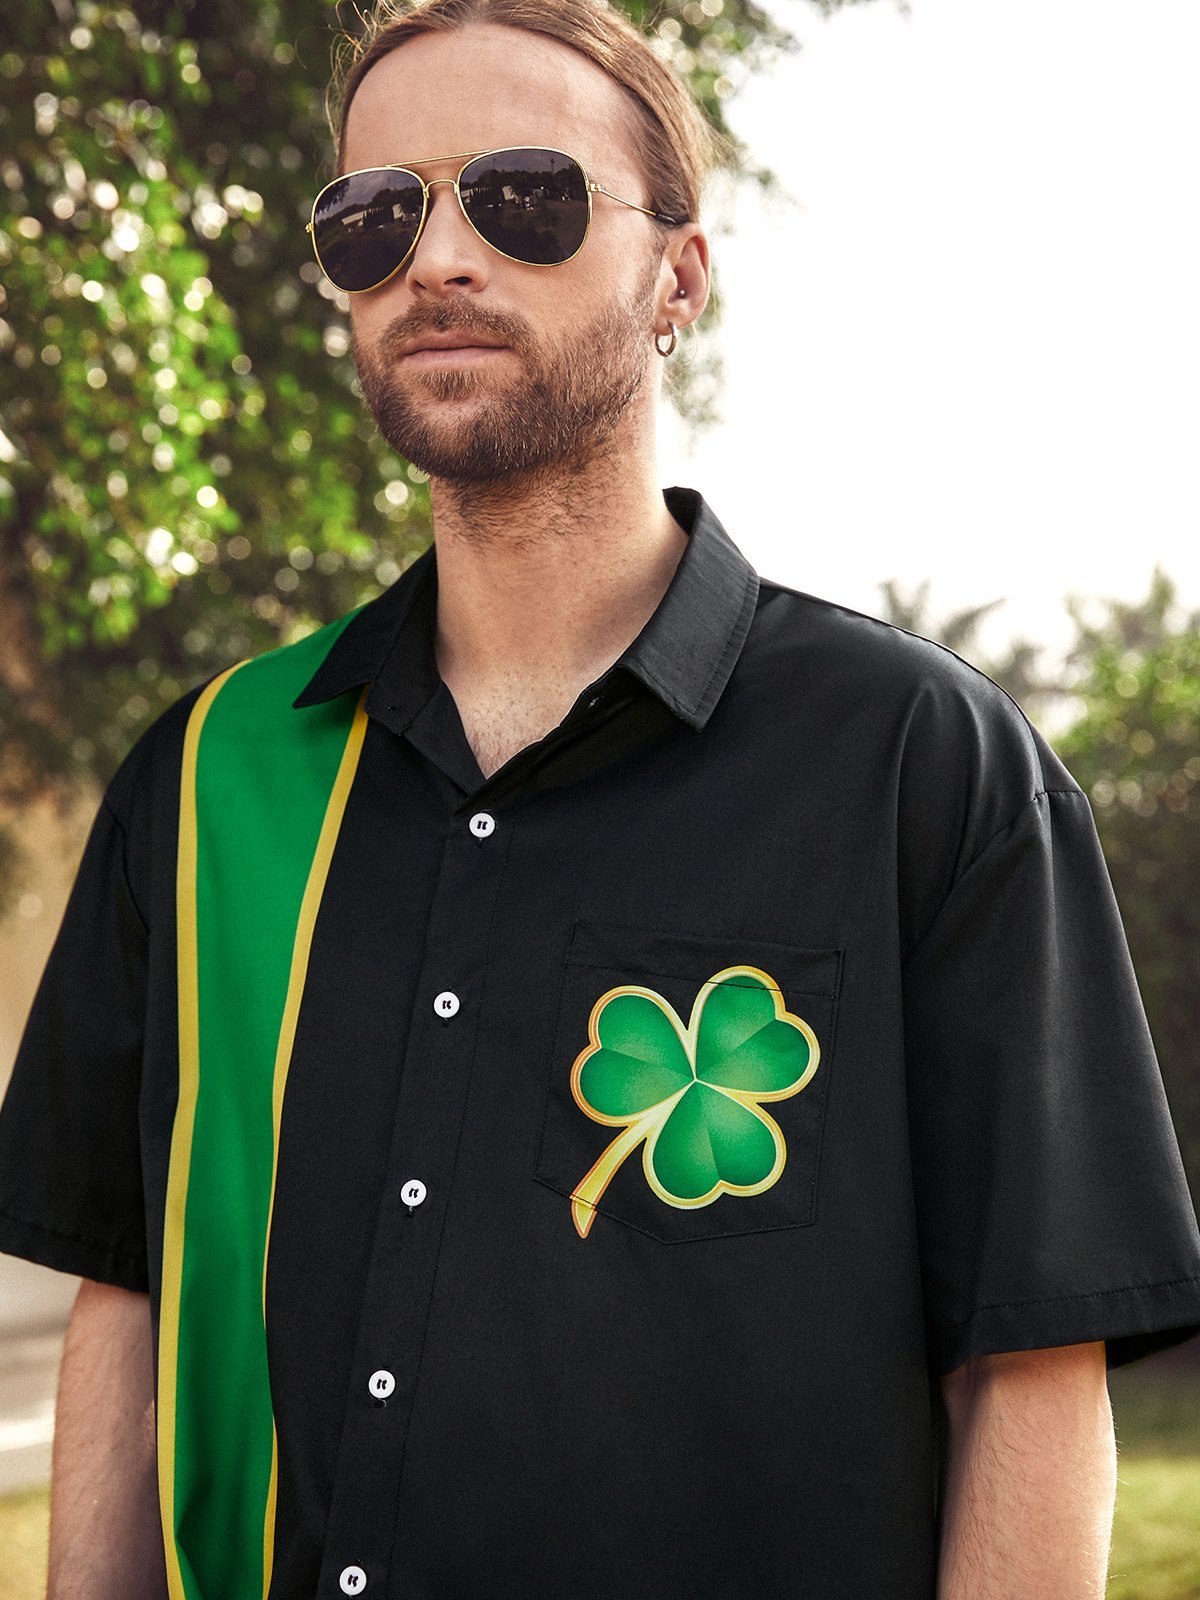 Hardaddy Hawaiian Button Up Shirt for Men Green And Black St. Patrick's Day Lucky Clover Regular Fit Short Sleeve Bowling Shirt St Paddy's Day Shirt